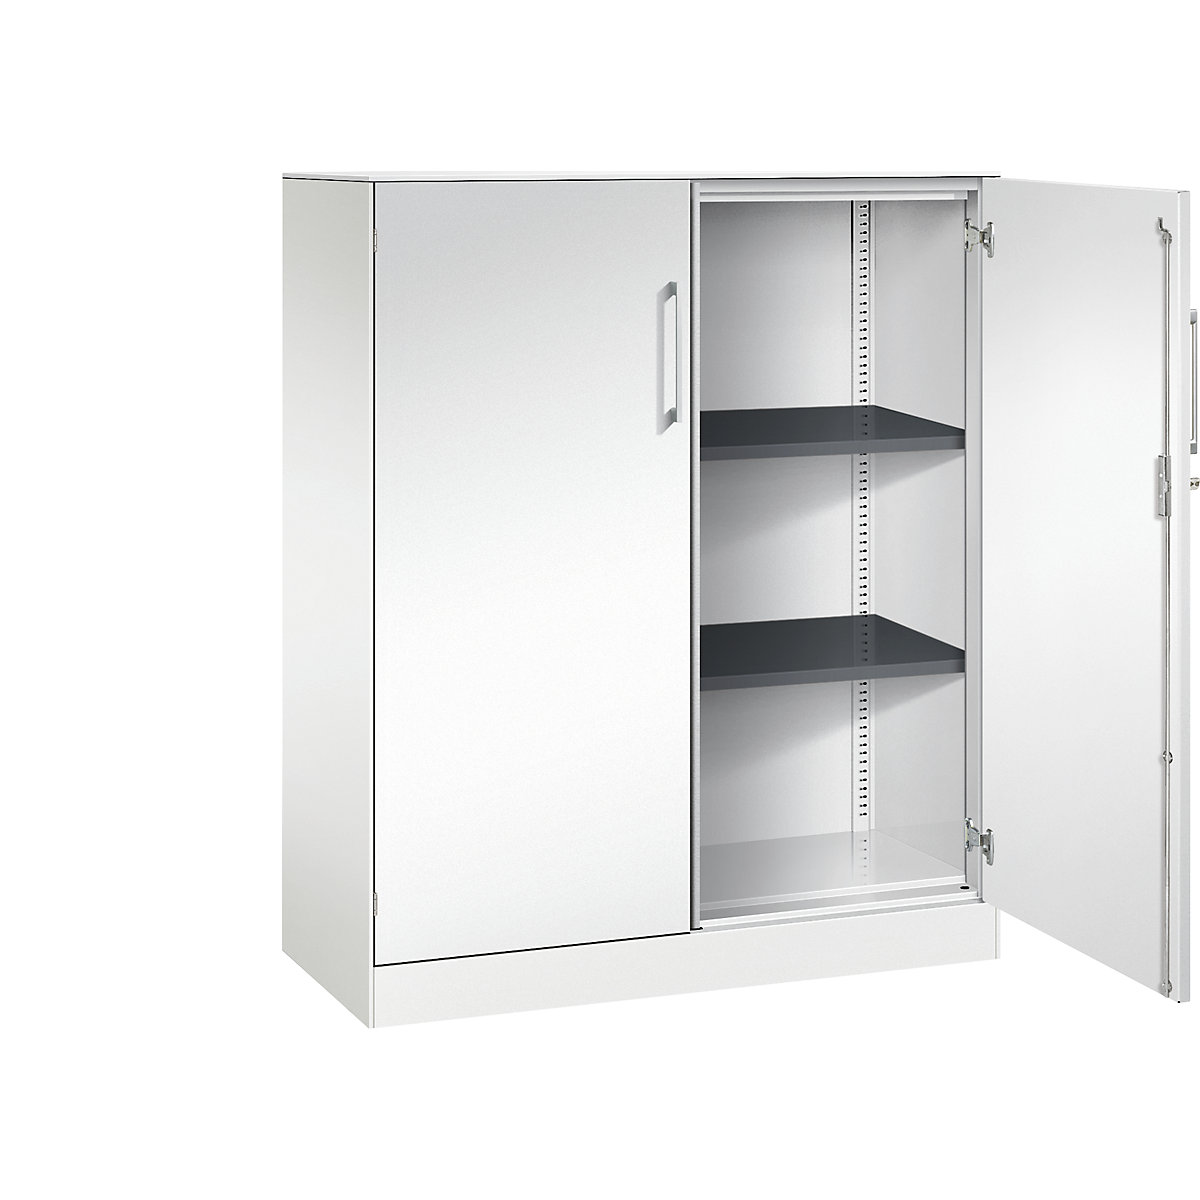 ASISTO double door cupboard, height 1292 mm – C+P, width 1000 mm, 2 shelves, traffic white/traffic white-15